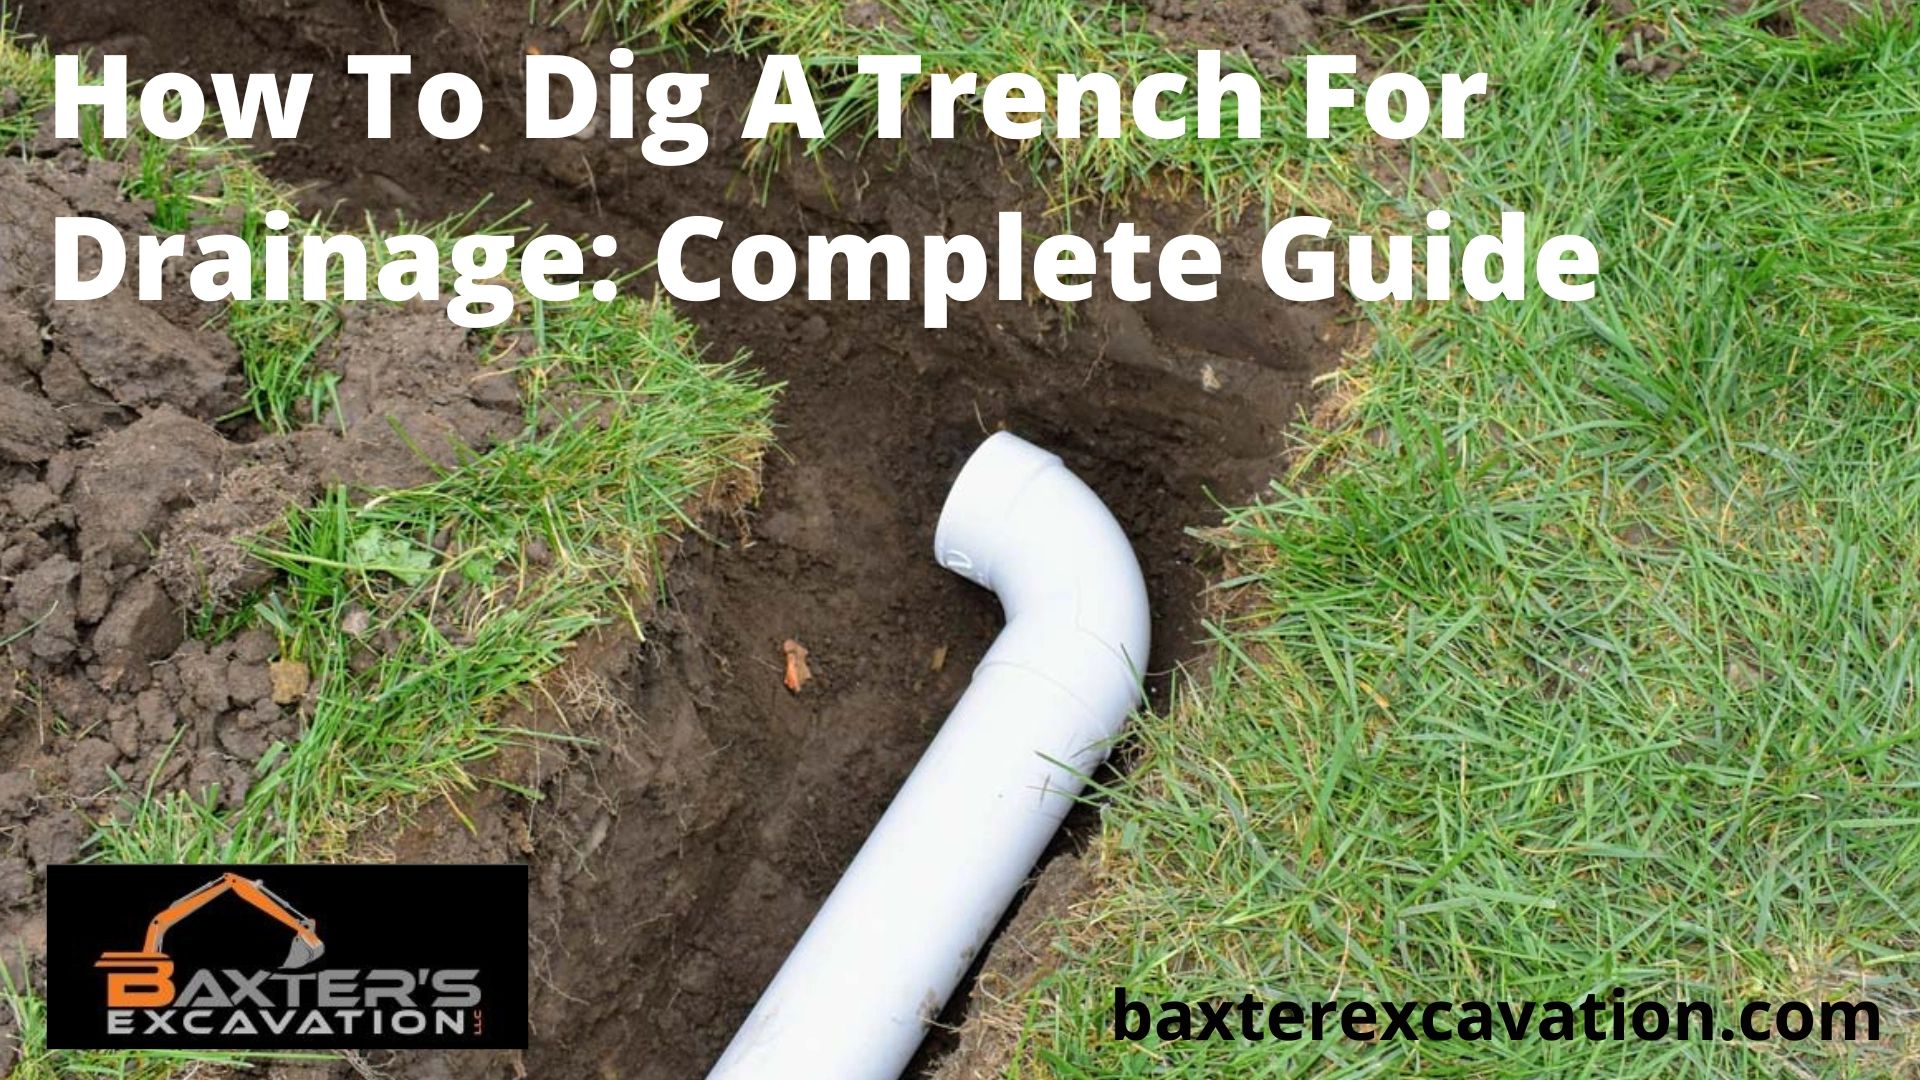 How To Dig A Trench For Drainage: Complete Guide